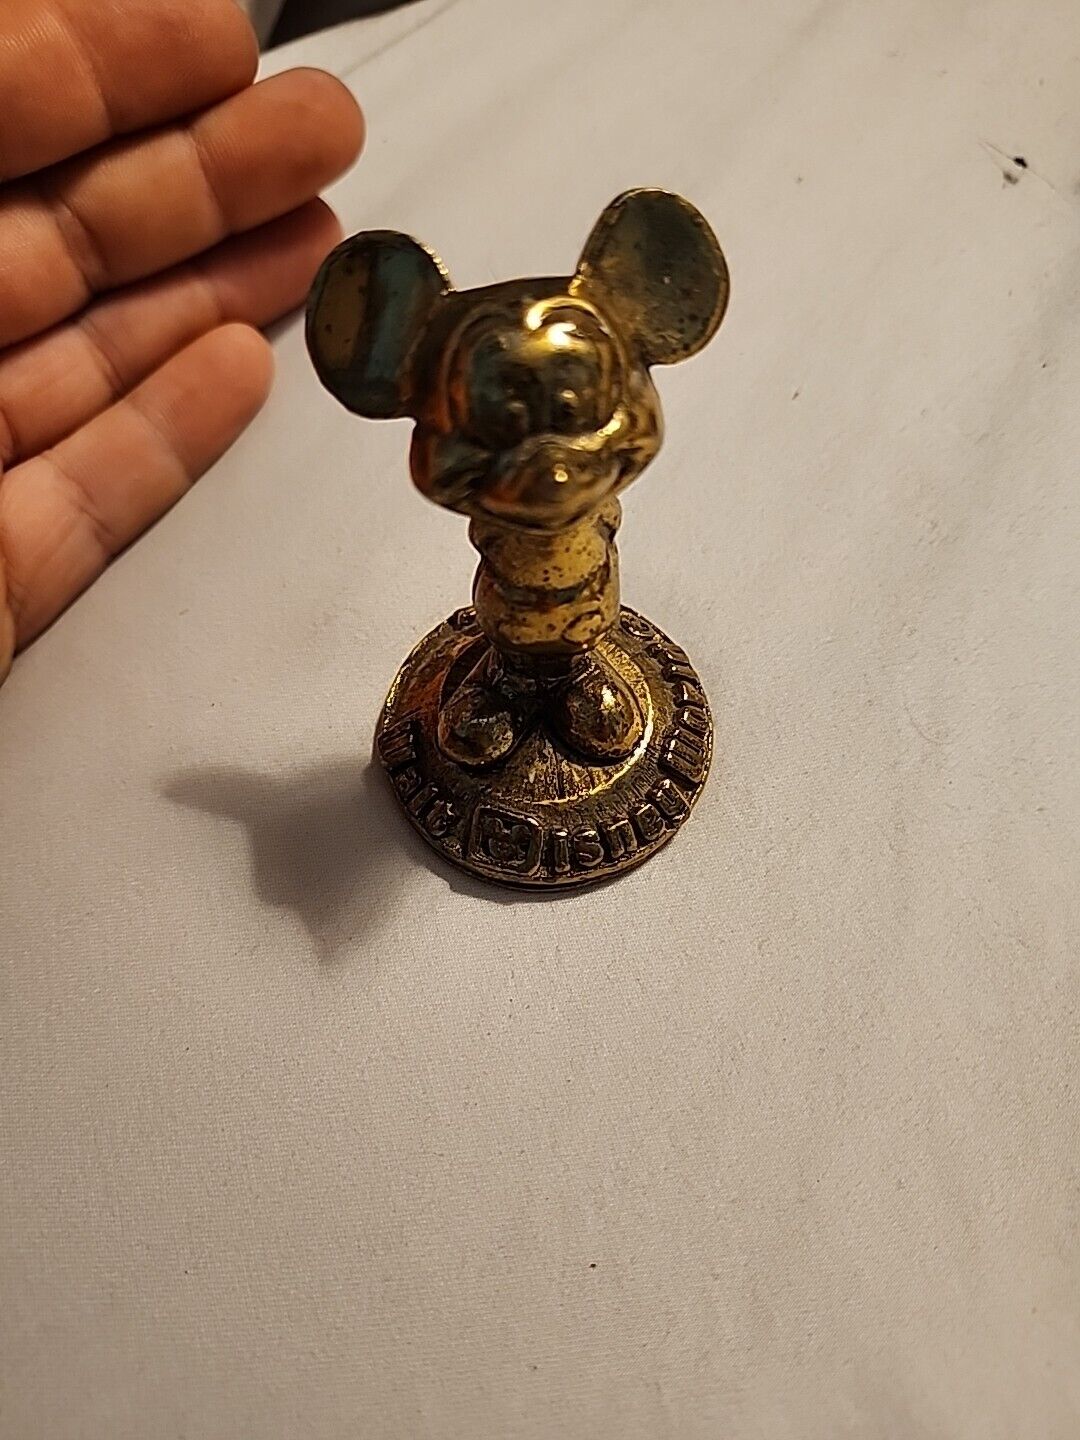 Vintage Disneyland Mickey Mouse Brass Paperweight Figurine 3” tall